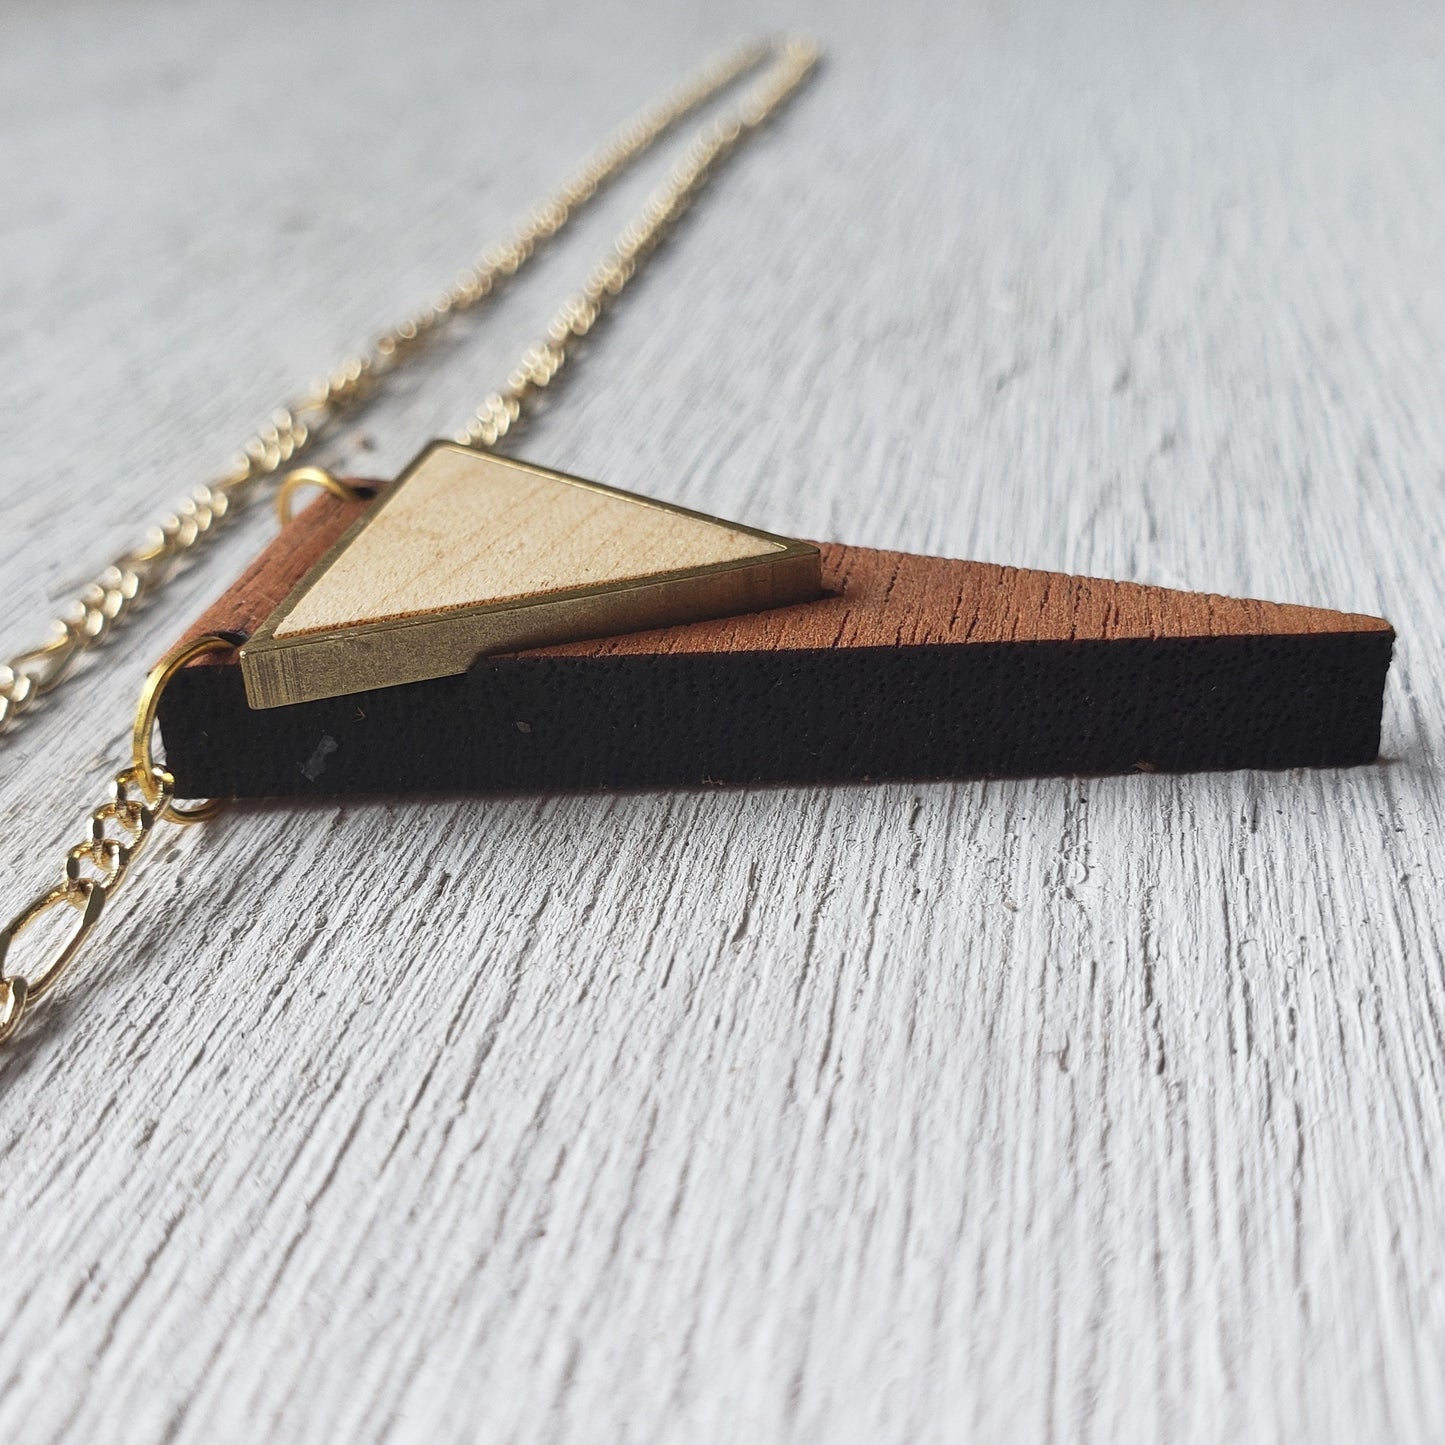 Inlaid Triangle - Laser Cut Wood Necklace || Geometric Jewelry || 5th Anniversary Gift for her || Gift for Girlfriend